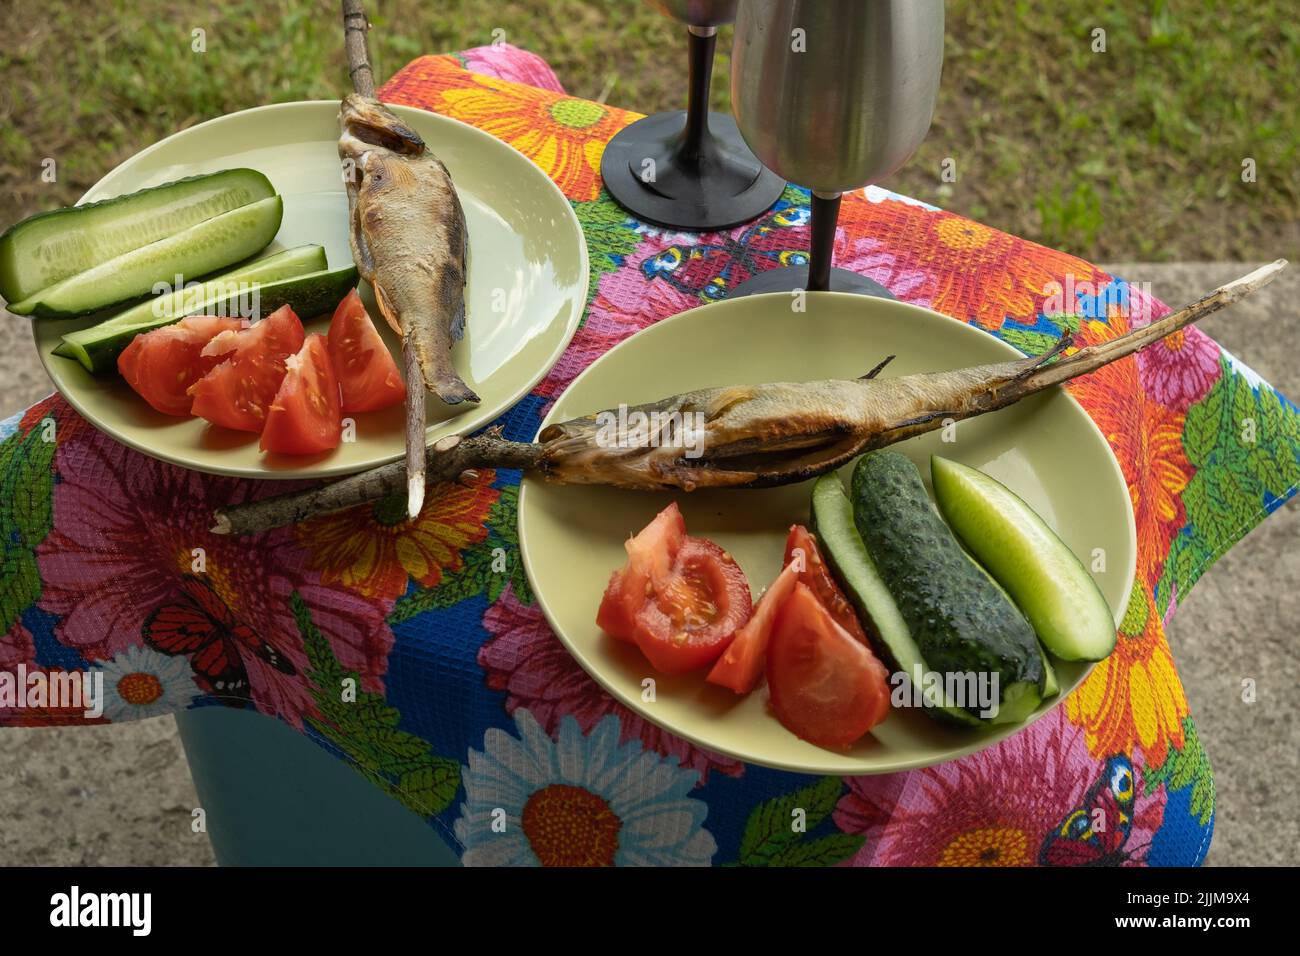 Picnic table in the garden with grilled fish and vegetables Stock Photo